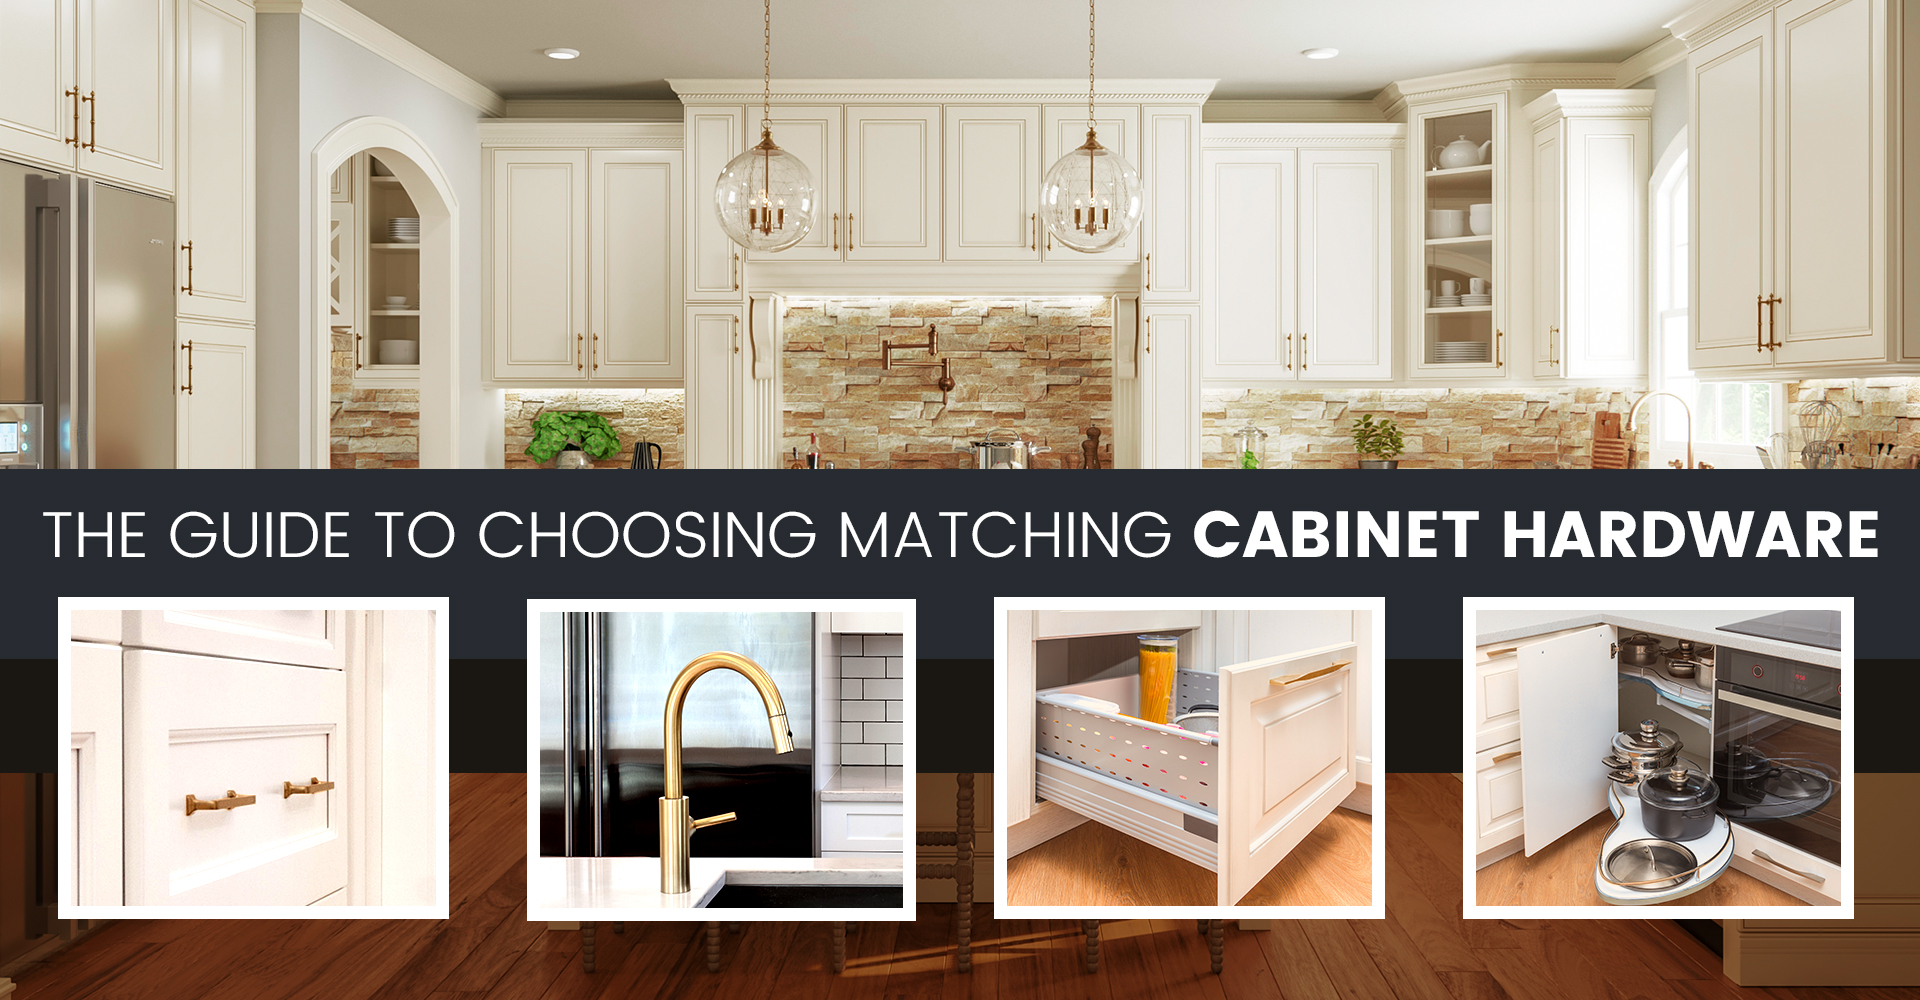 The Guide to Choosing Matching Cabinet Hardware